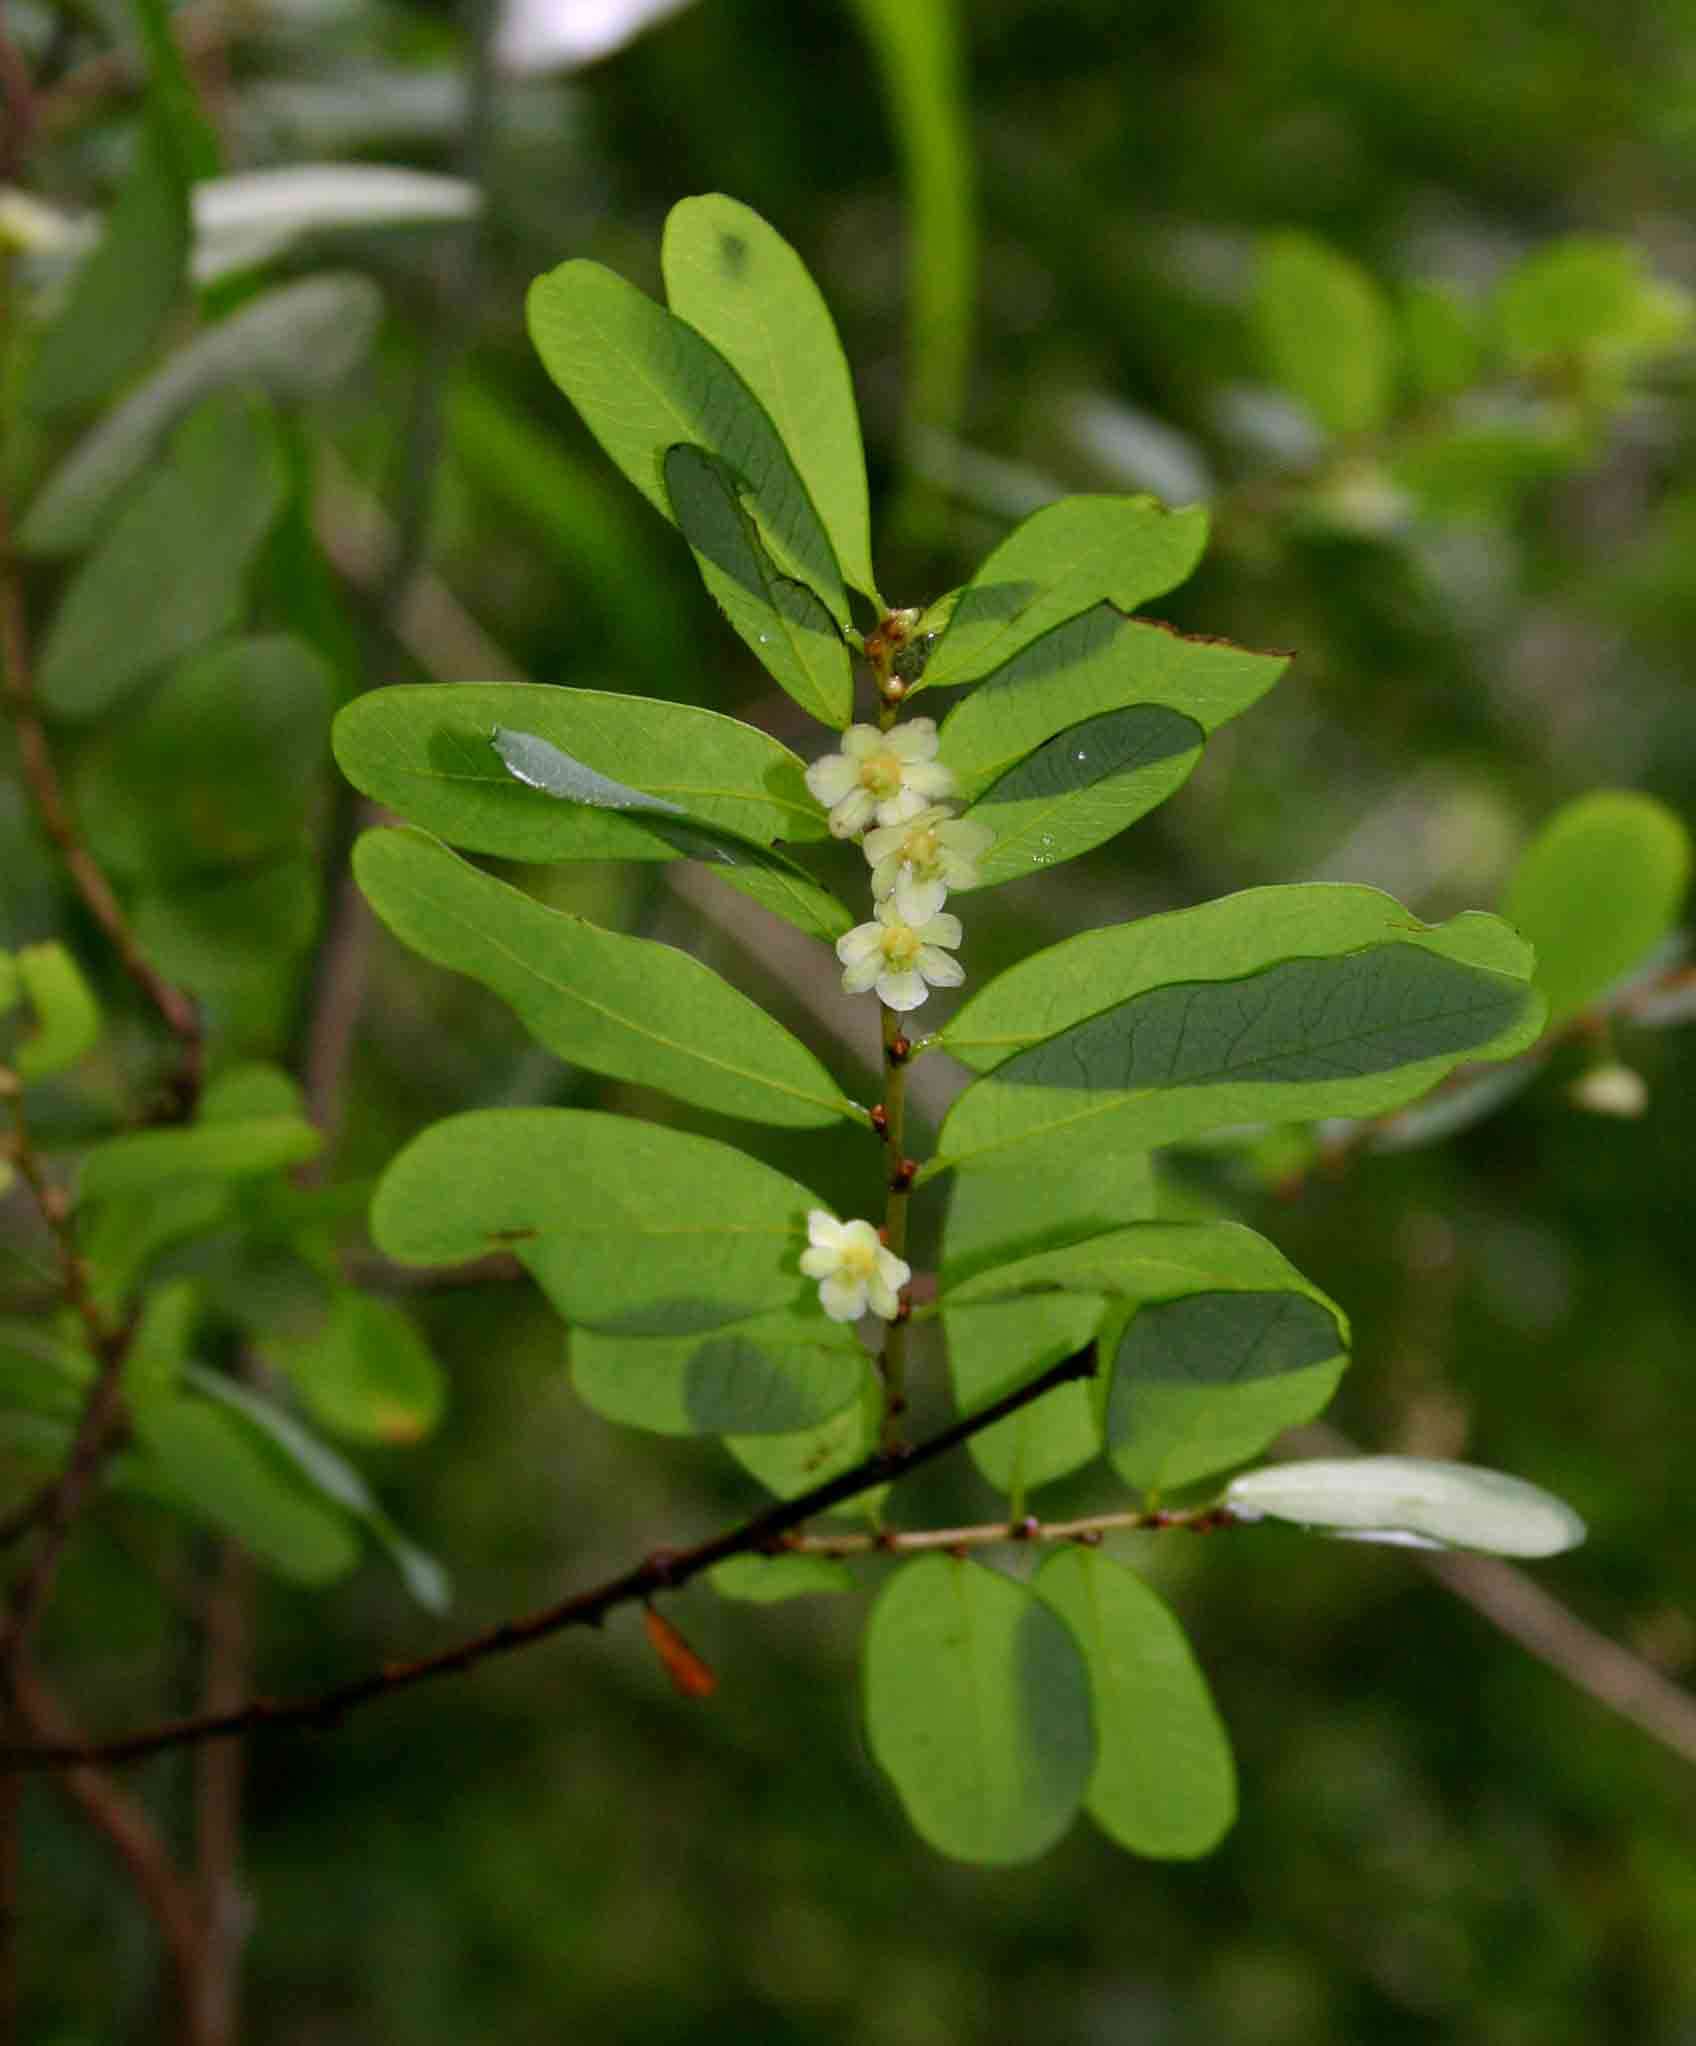 Image of Phyllanthus welwitschianus Müll. Arg.